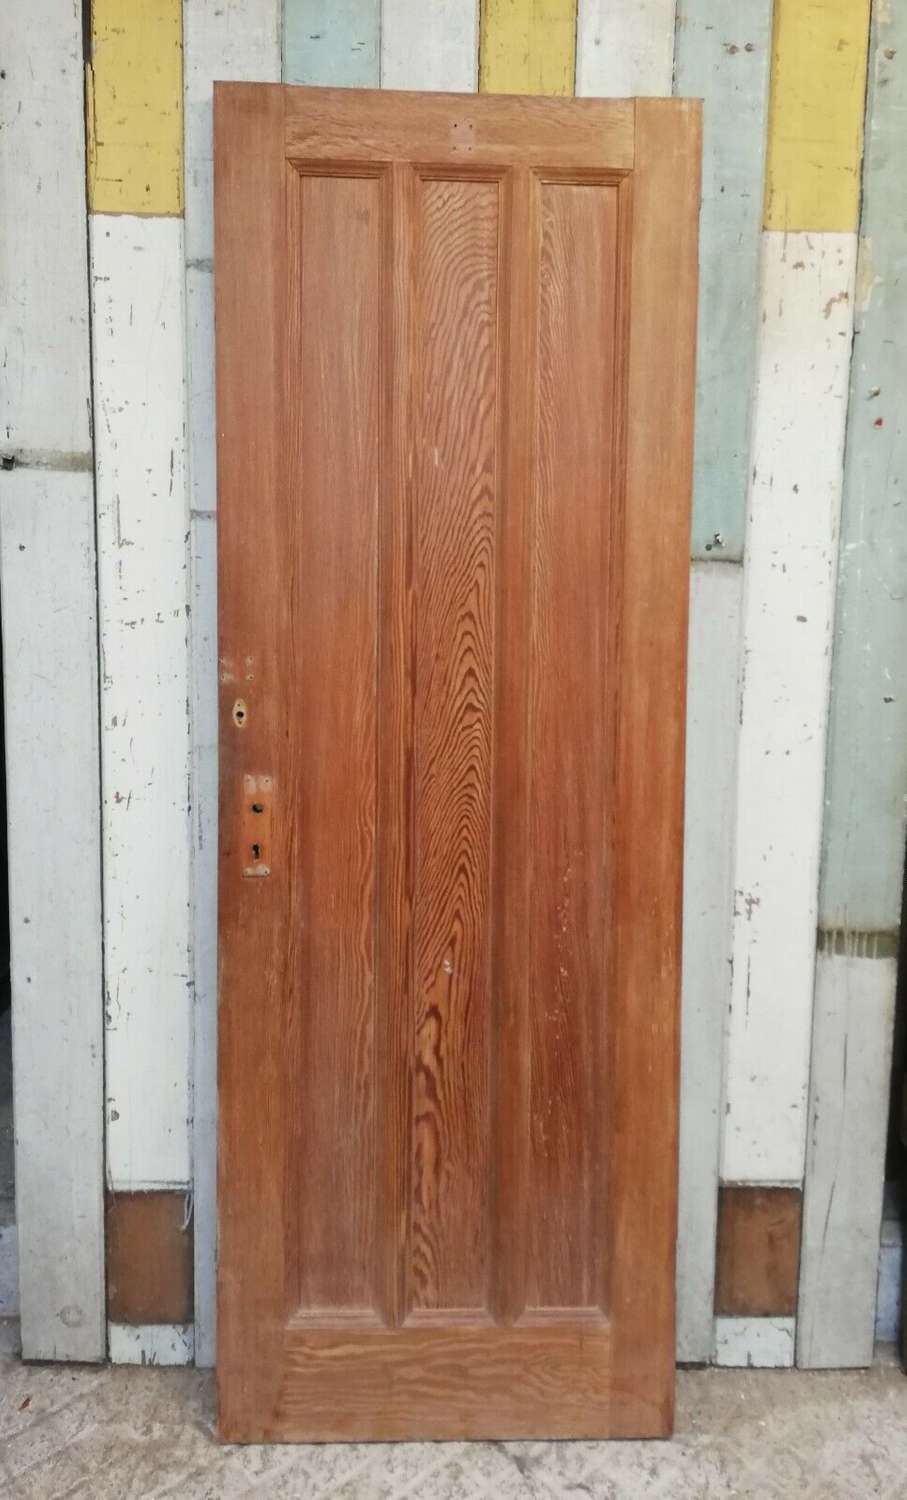 DI0701 A RECLAIMED PITCH PINE ARTS AND CRAFTS INTERNAL DOOR